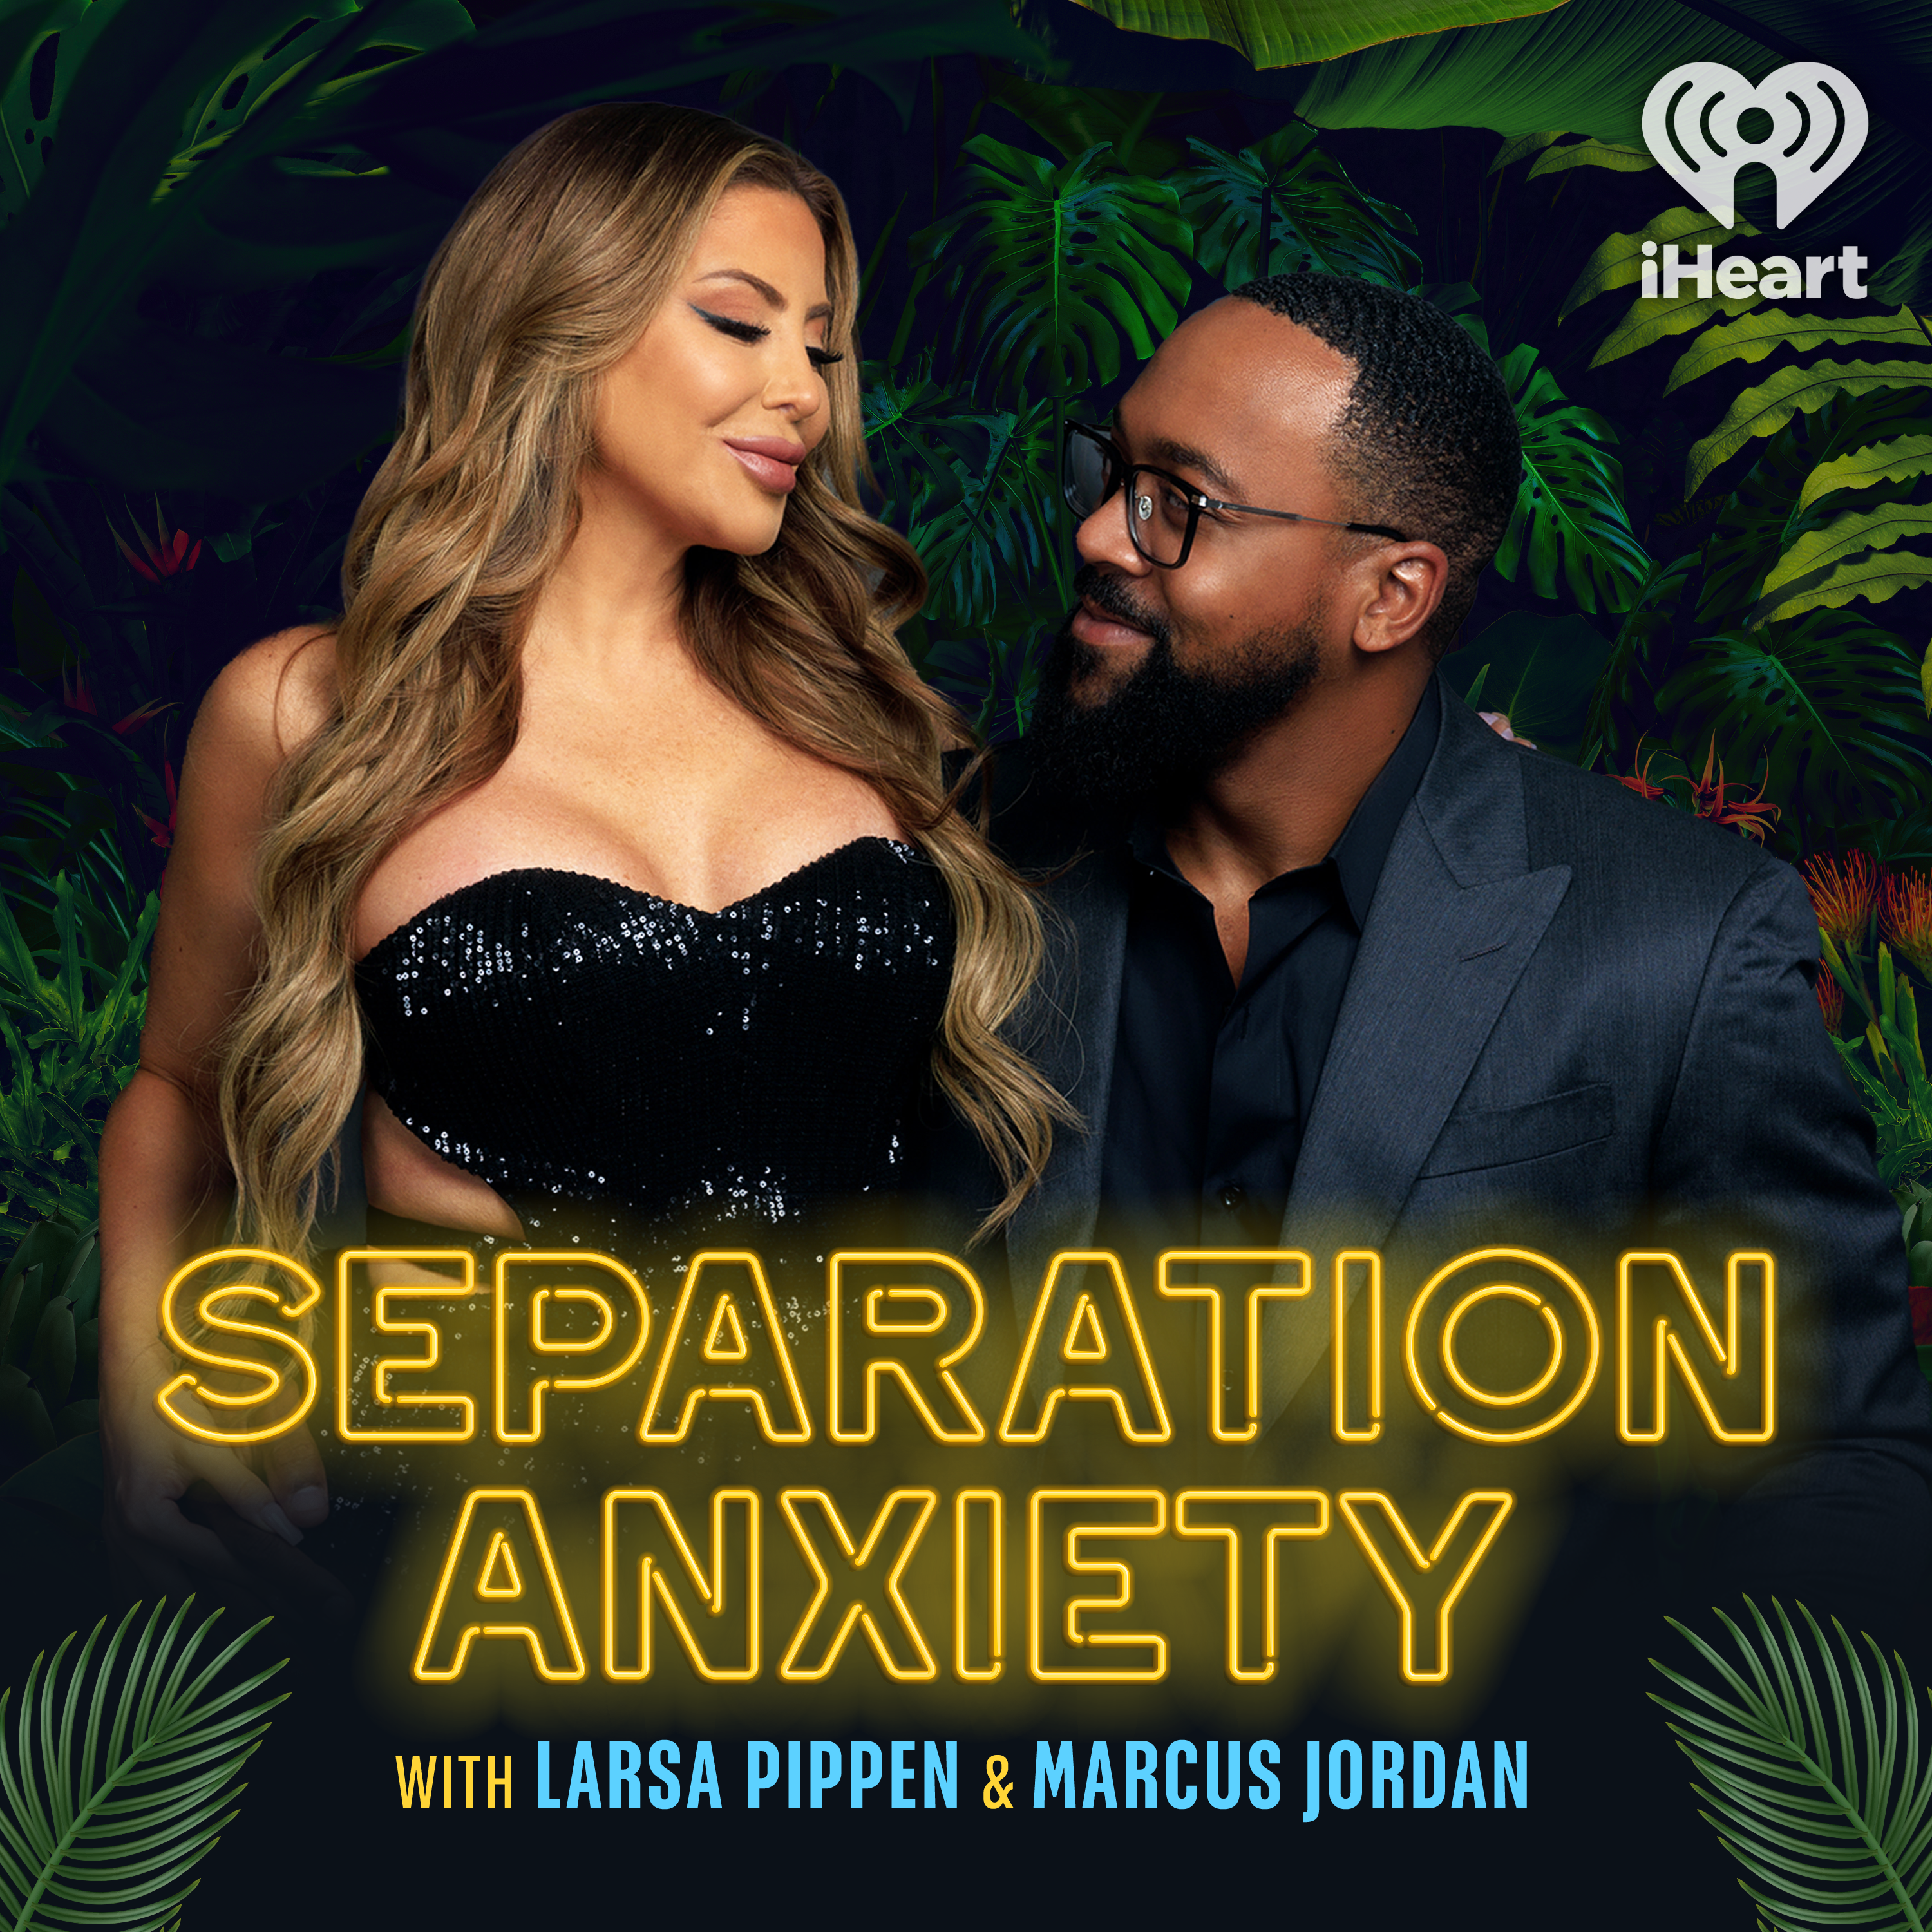 Introducing: Separation Anxiety with Larsa and Marcus